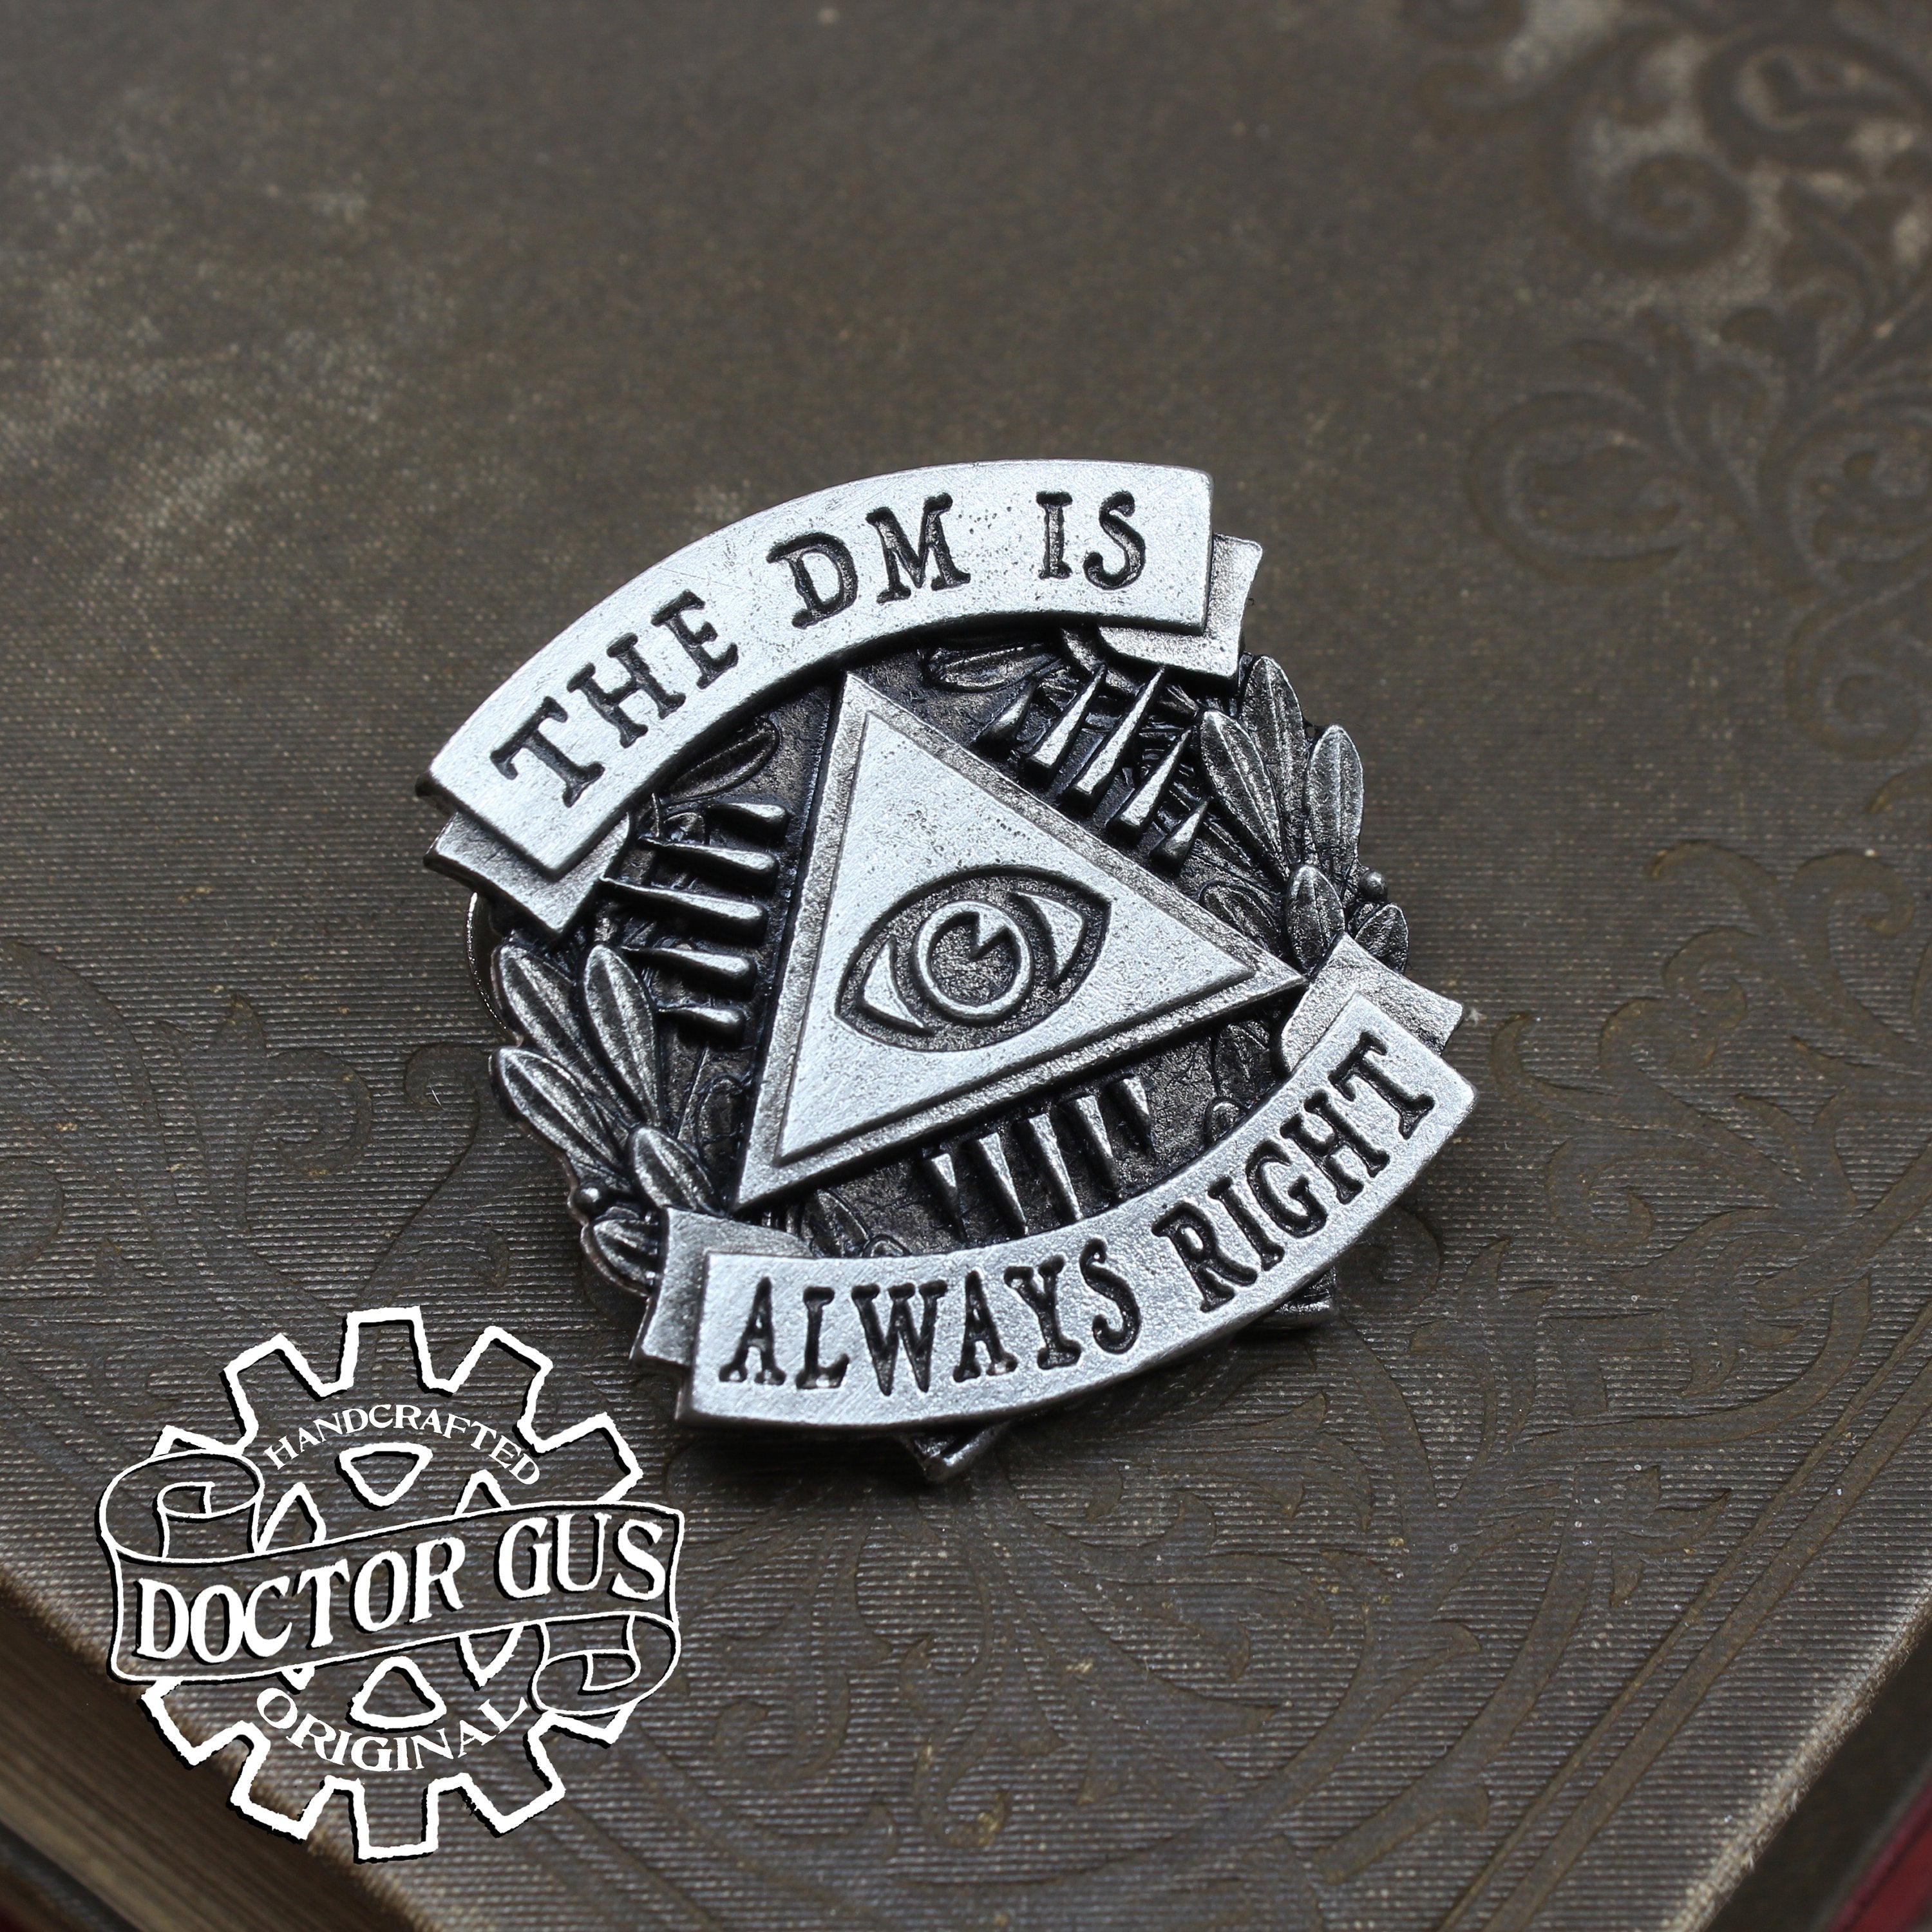 Life's Not Faire Badge – Doctor Gus Designs